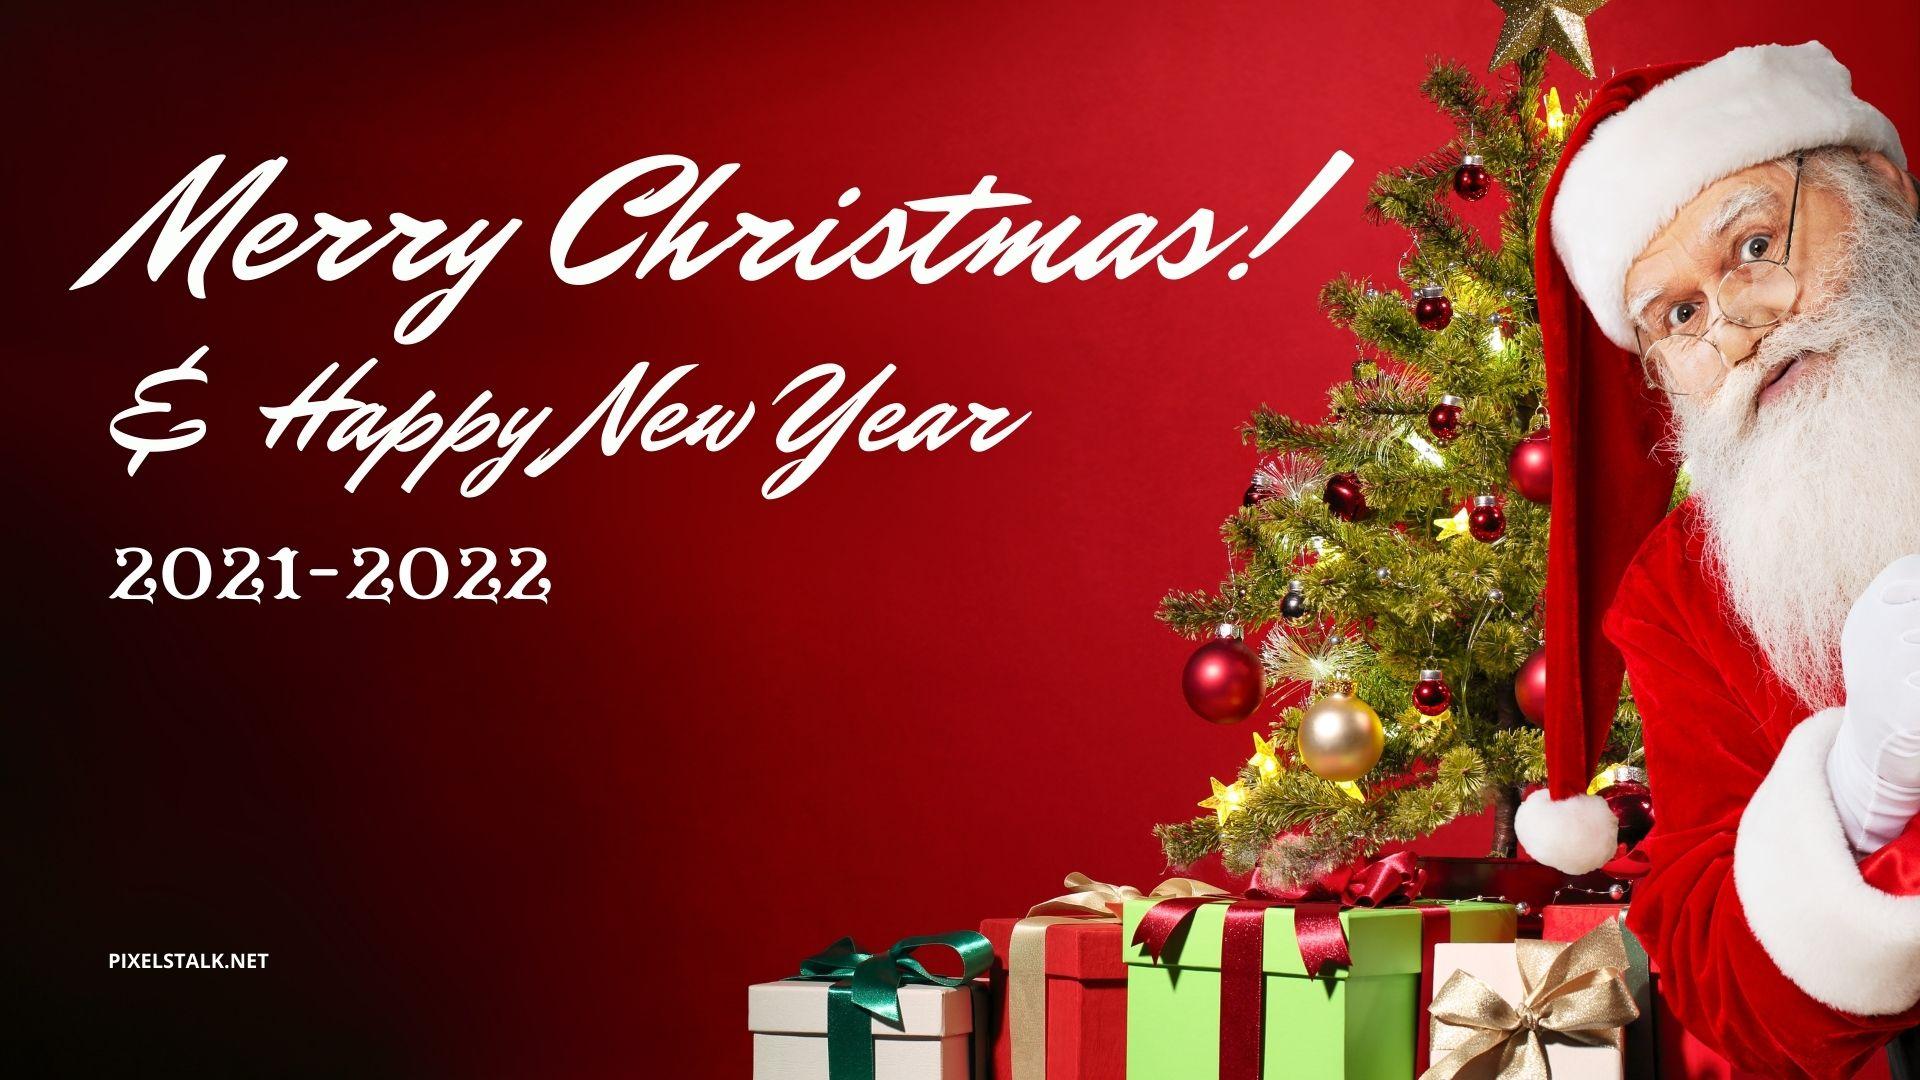 Merry Christmas 2022 Wallpapers - Top Free Merry Christmas 2022 ...